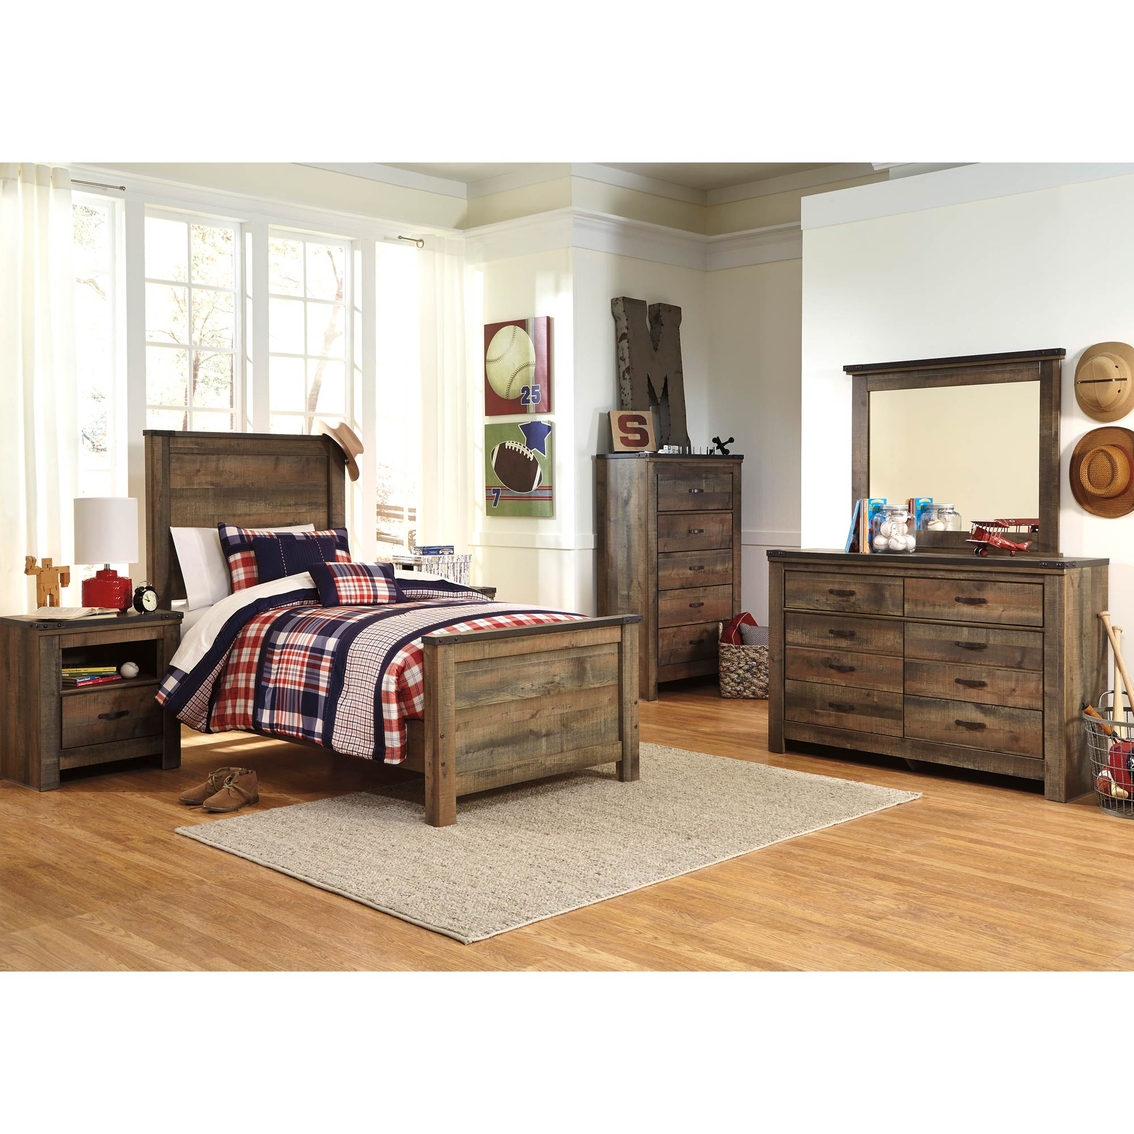 Ashley Trinell Twin Panel Bed - Image 2 of 3